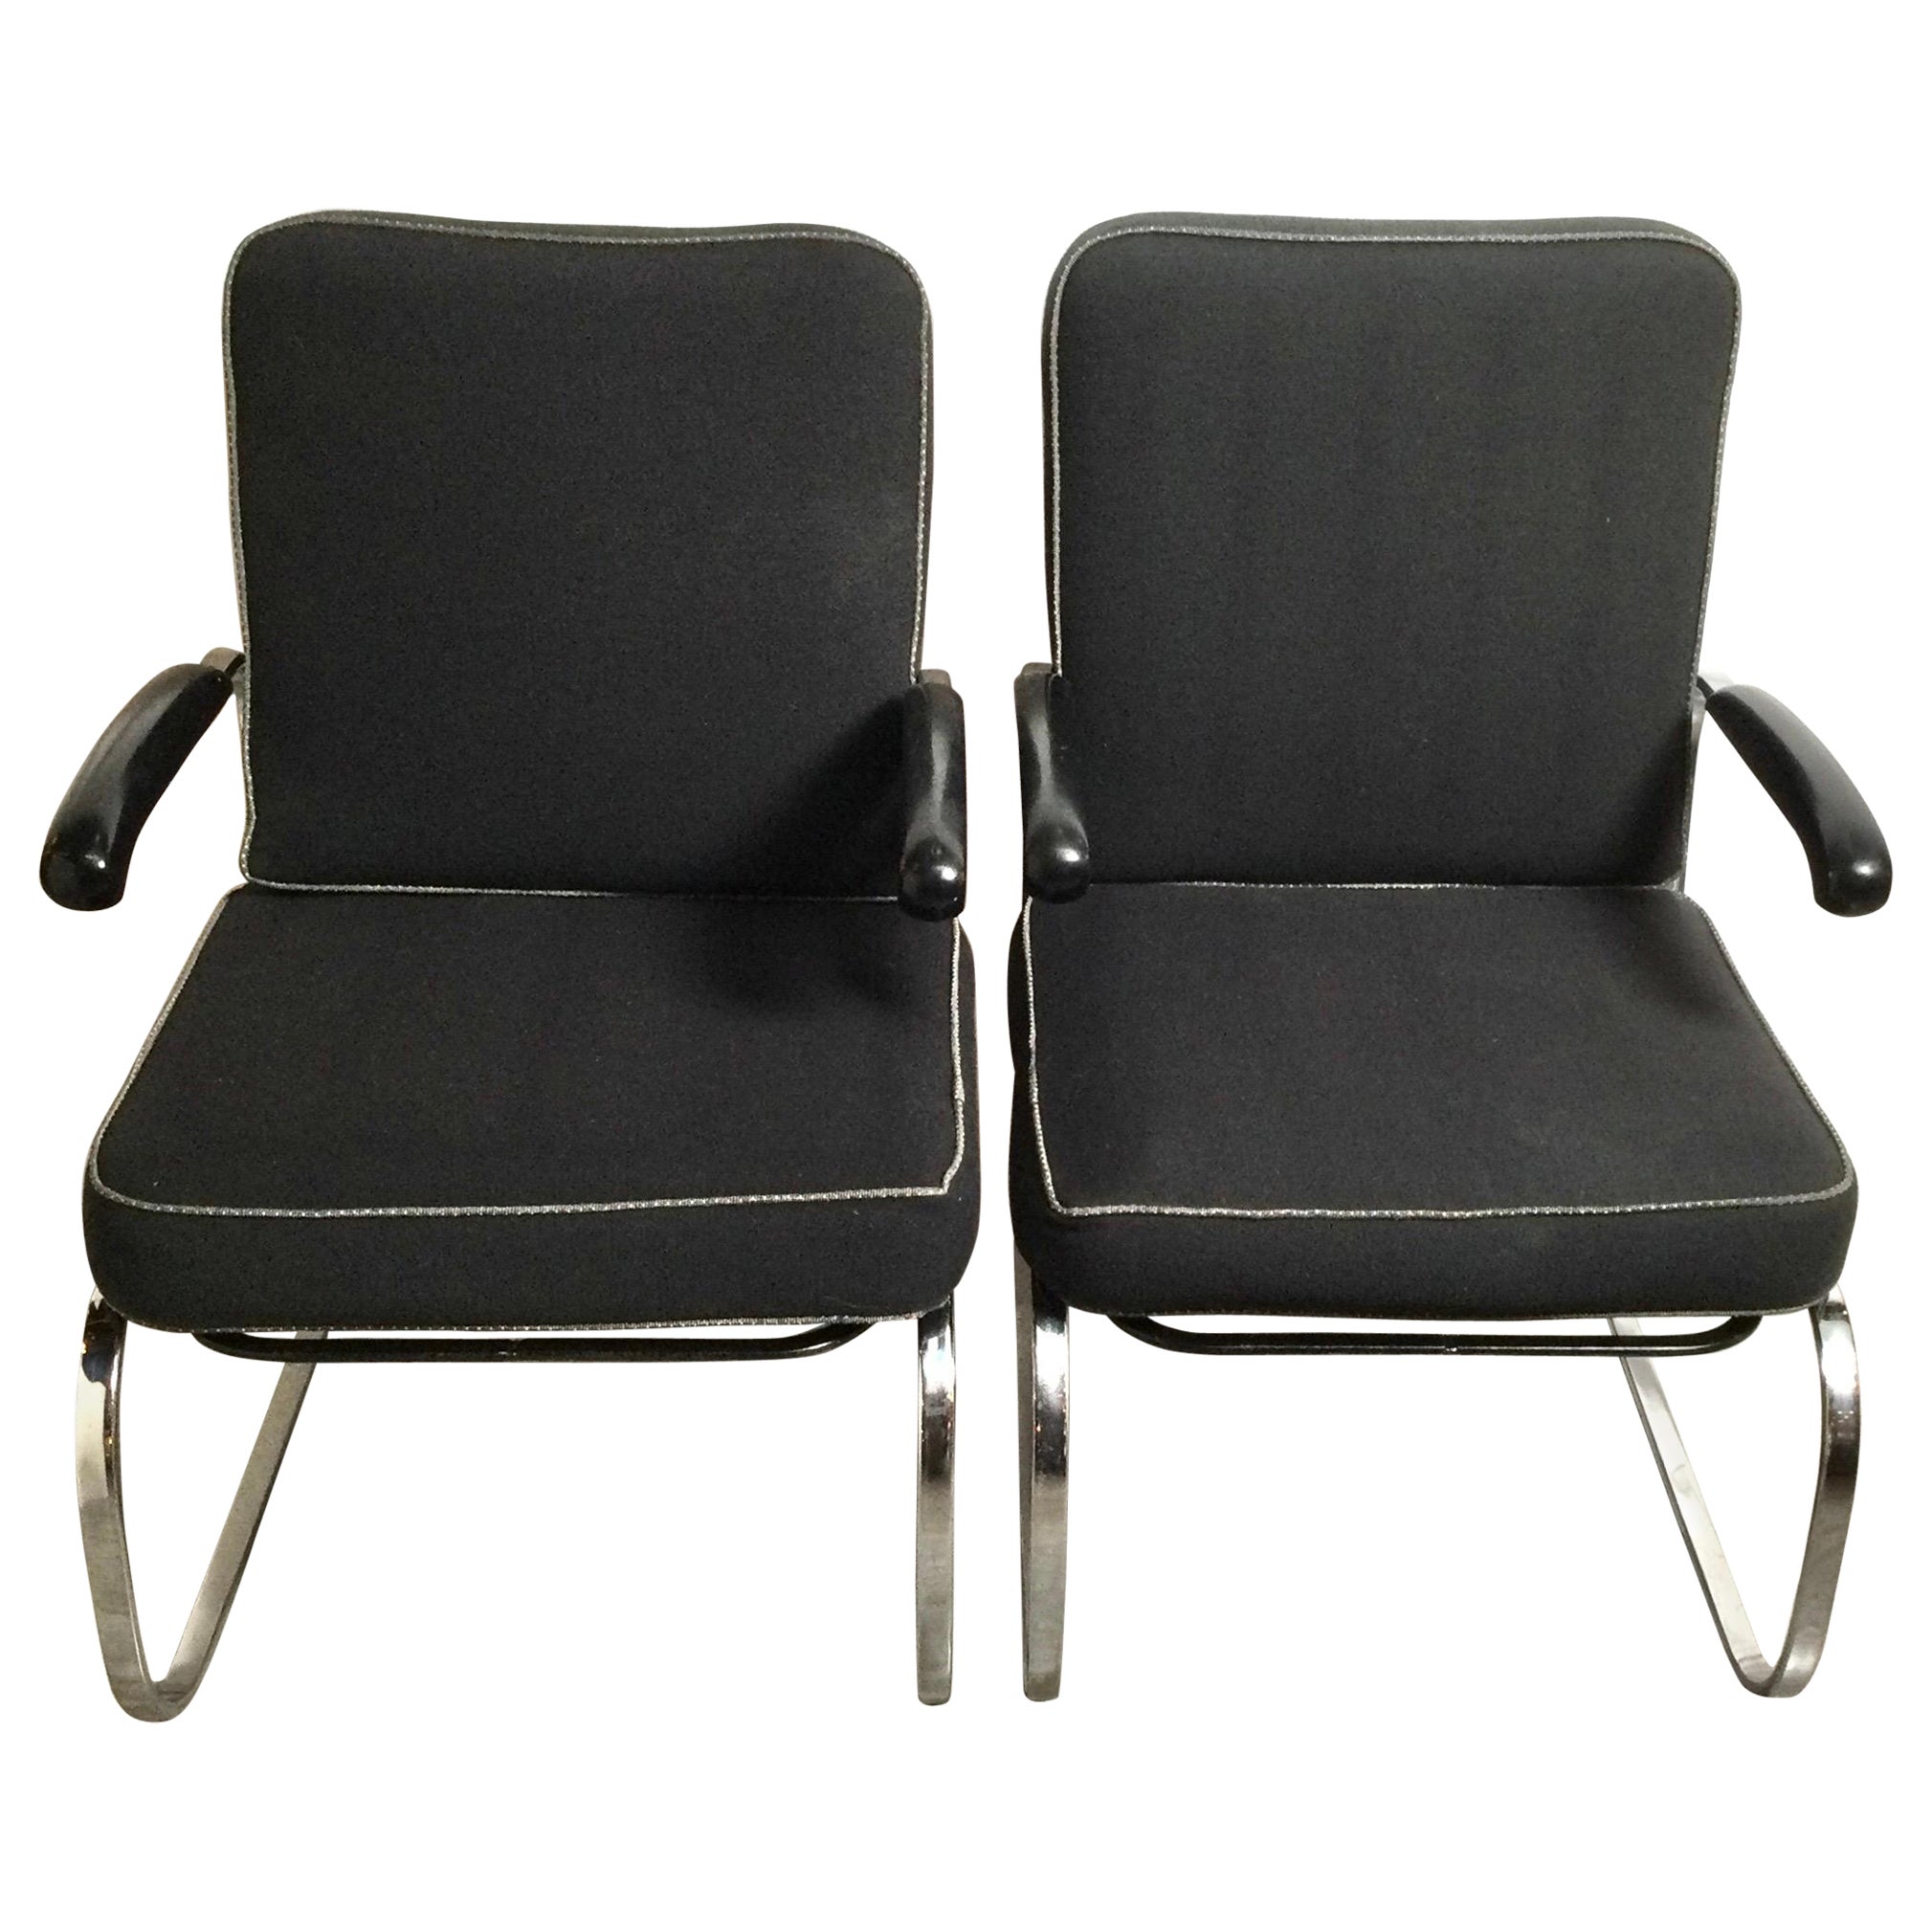 Pair of Gilbert Rohde Designs Armchairs